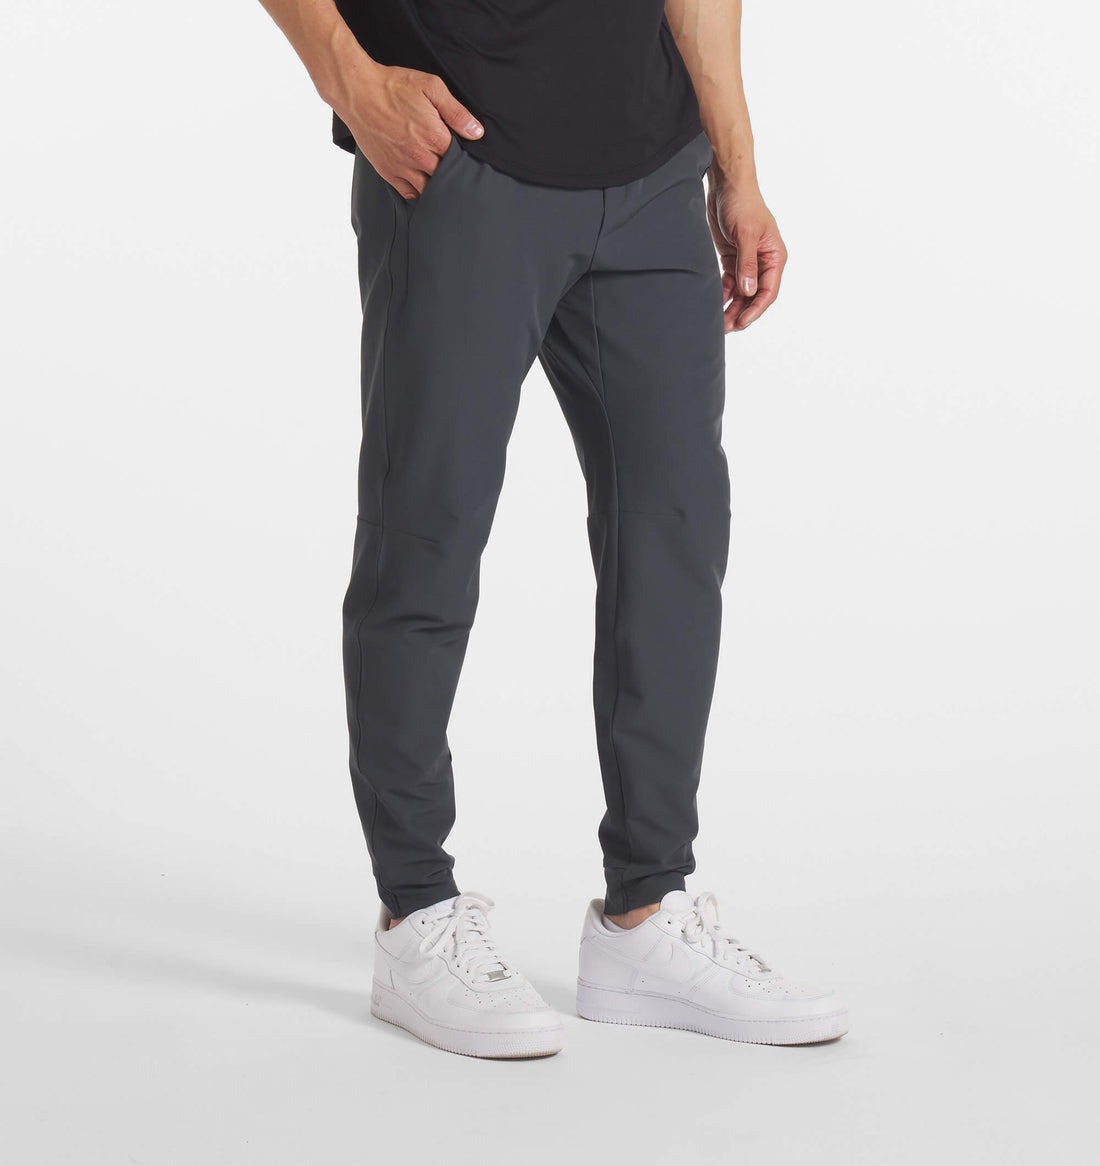 UNRL Performance Pant | Best-Selling Jogger